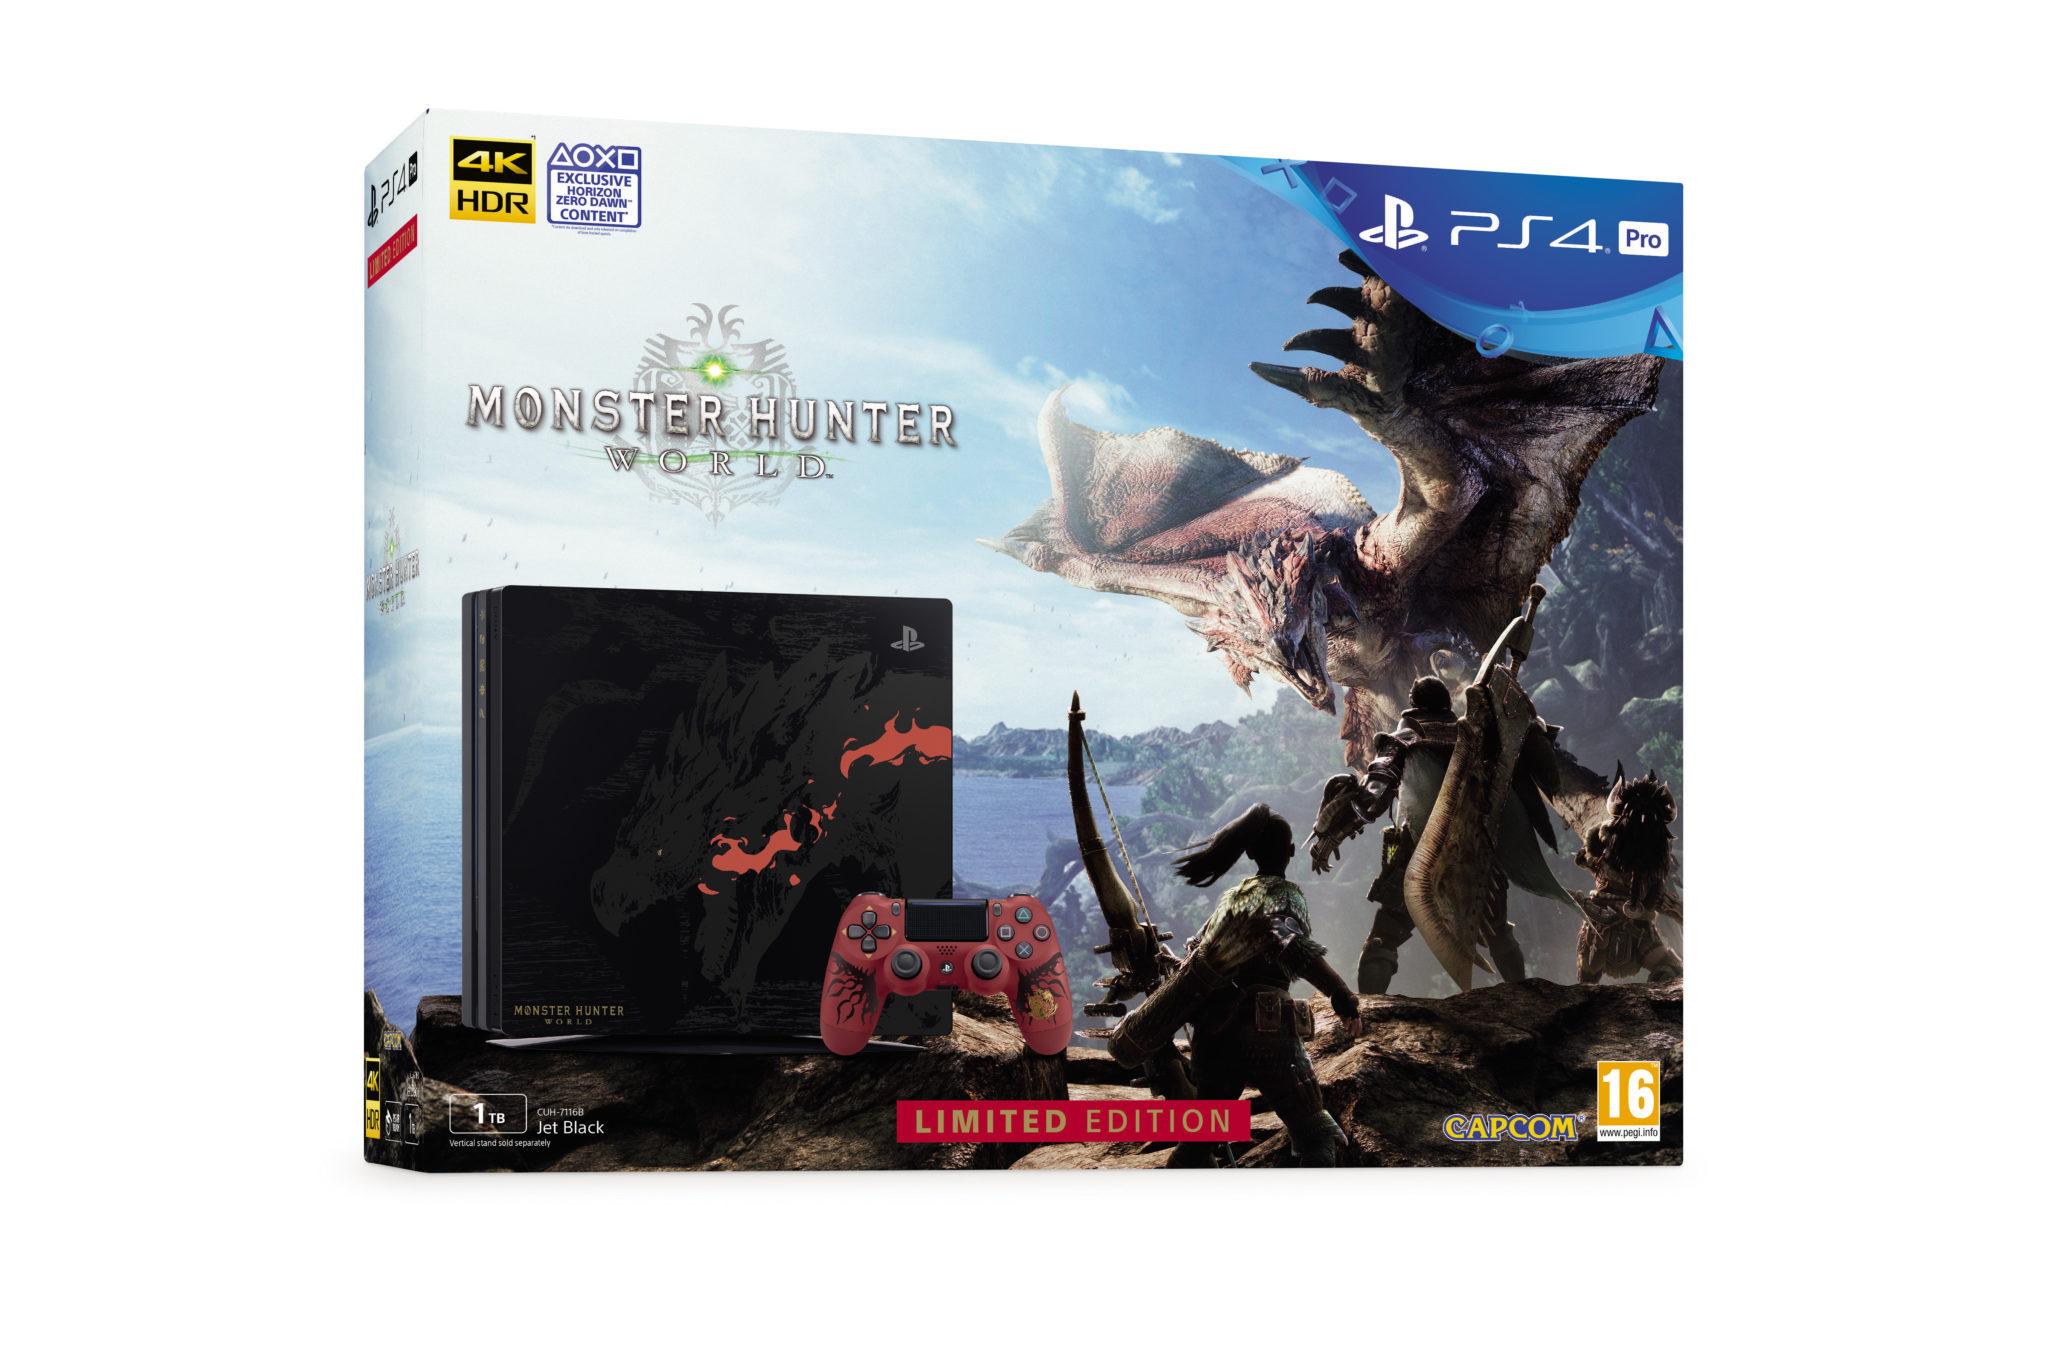 Monster Hunter: World PS4 Pro Launches in NA & EU | Gaming Instincts